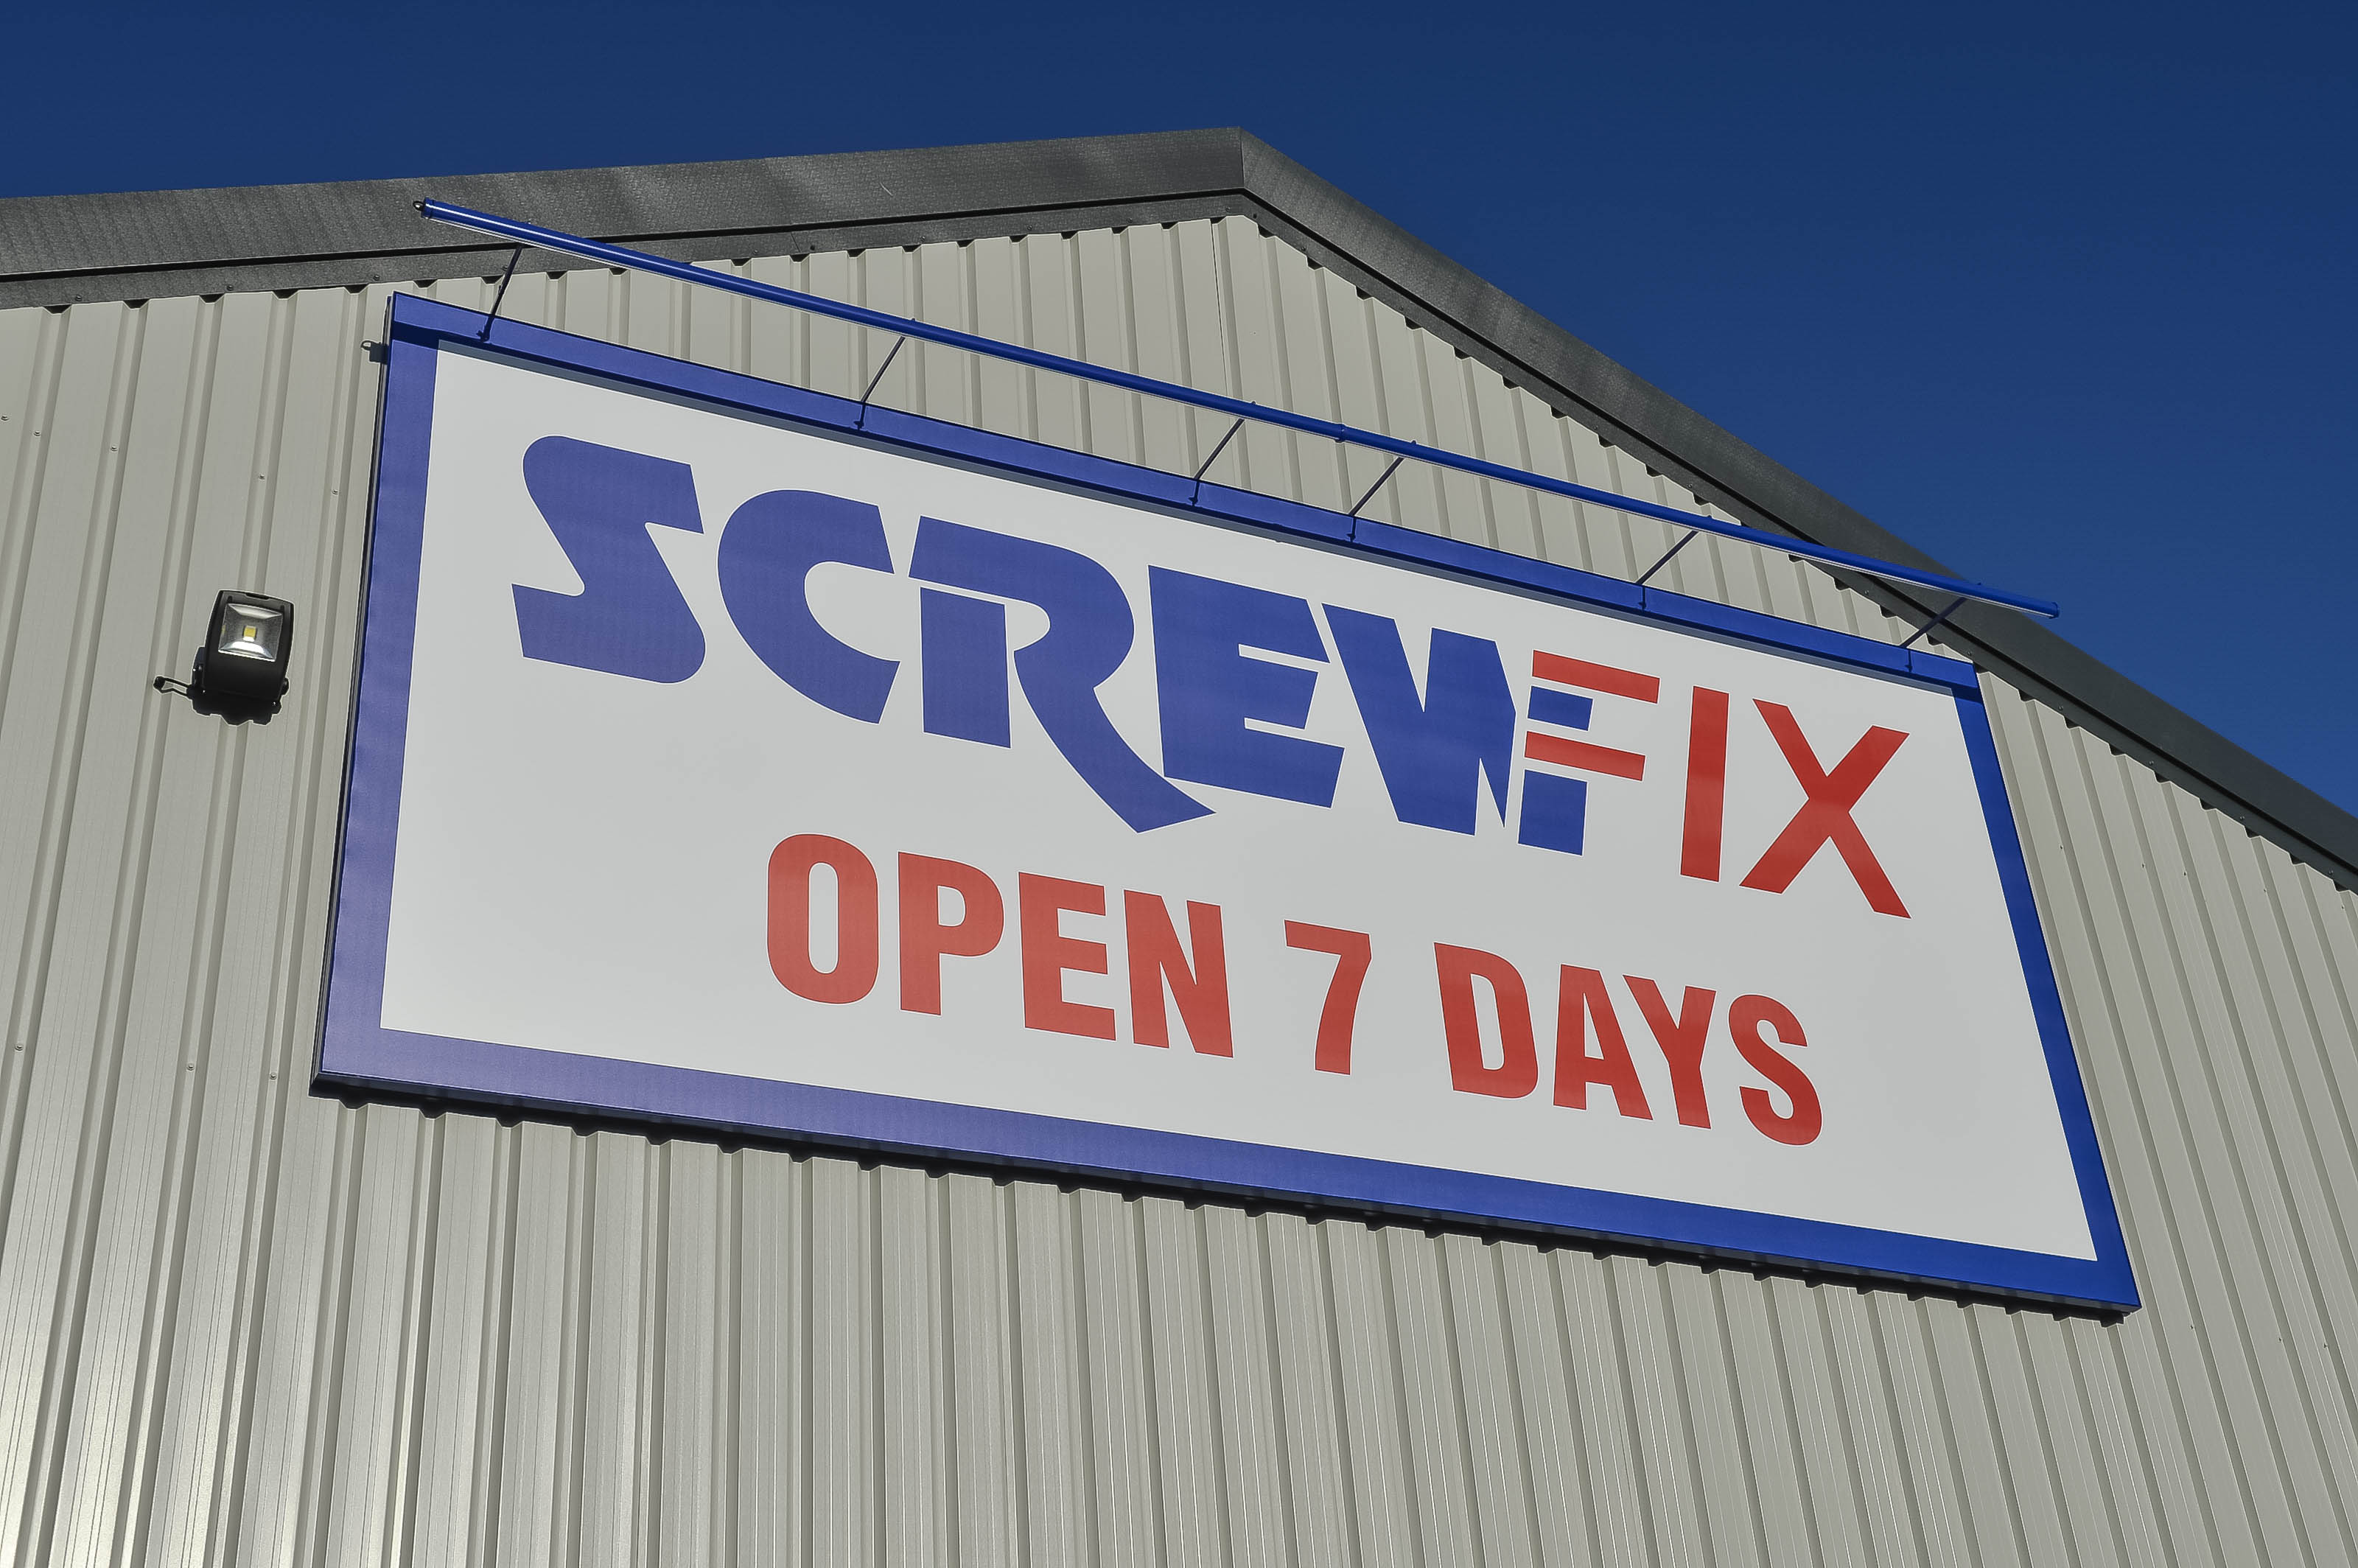 Chelmsford’s second Screwfix store to officially open in March